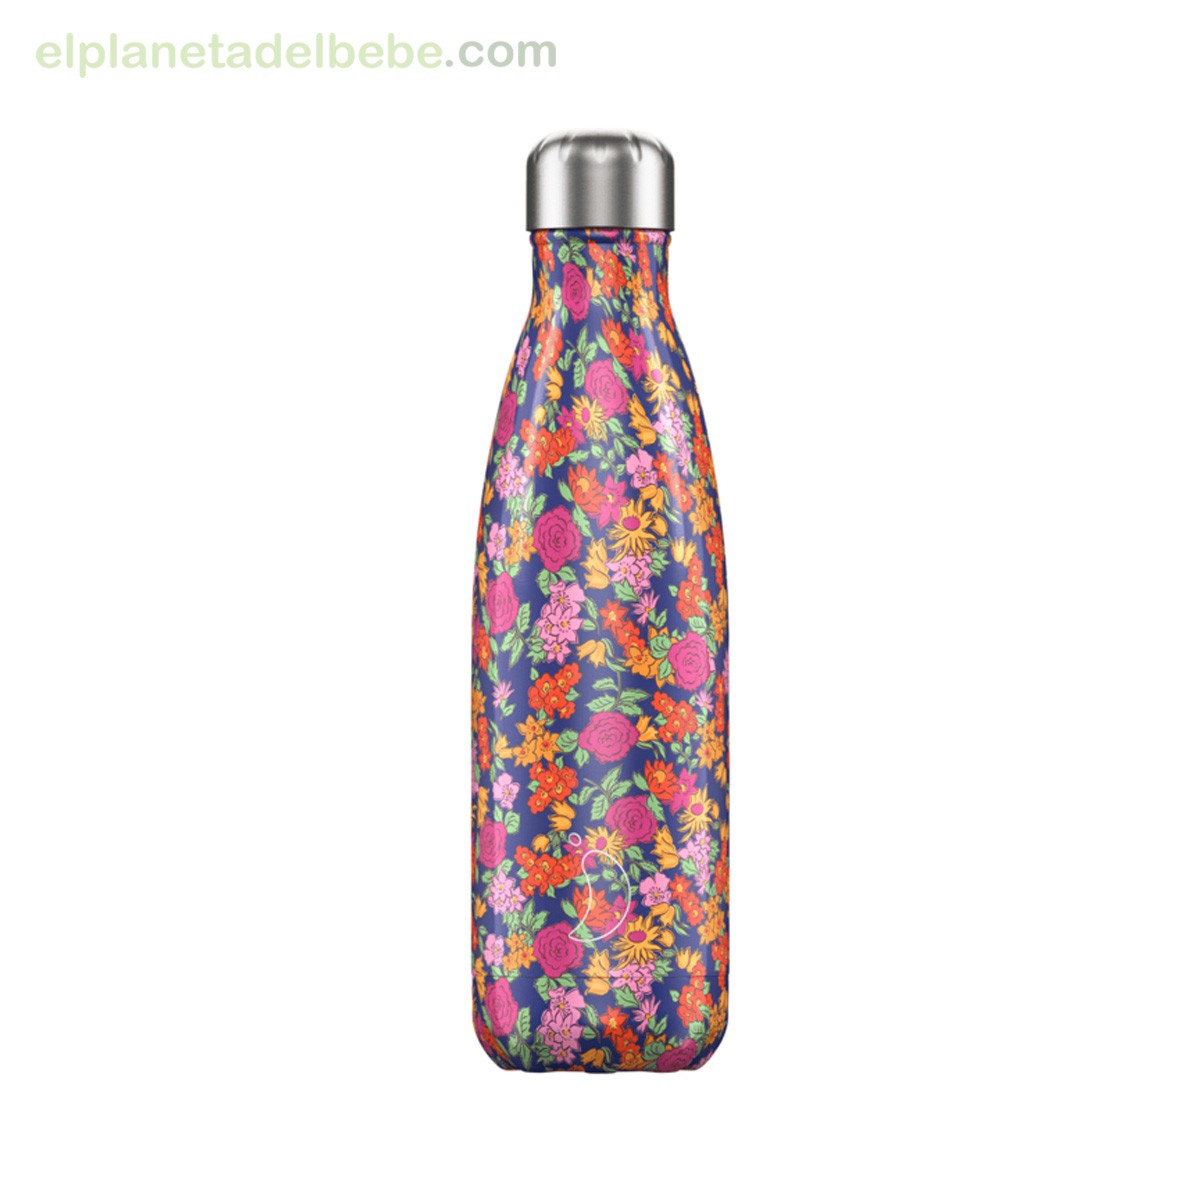 BOTELLA CHILLY ACERO INOX POOL PARTY CORAL 500 ML CHILLY